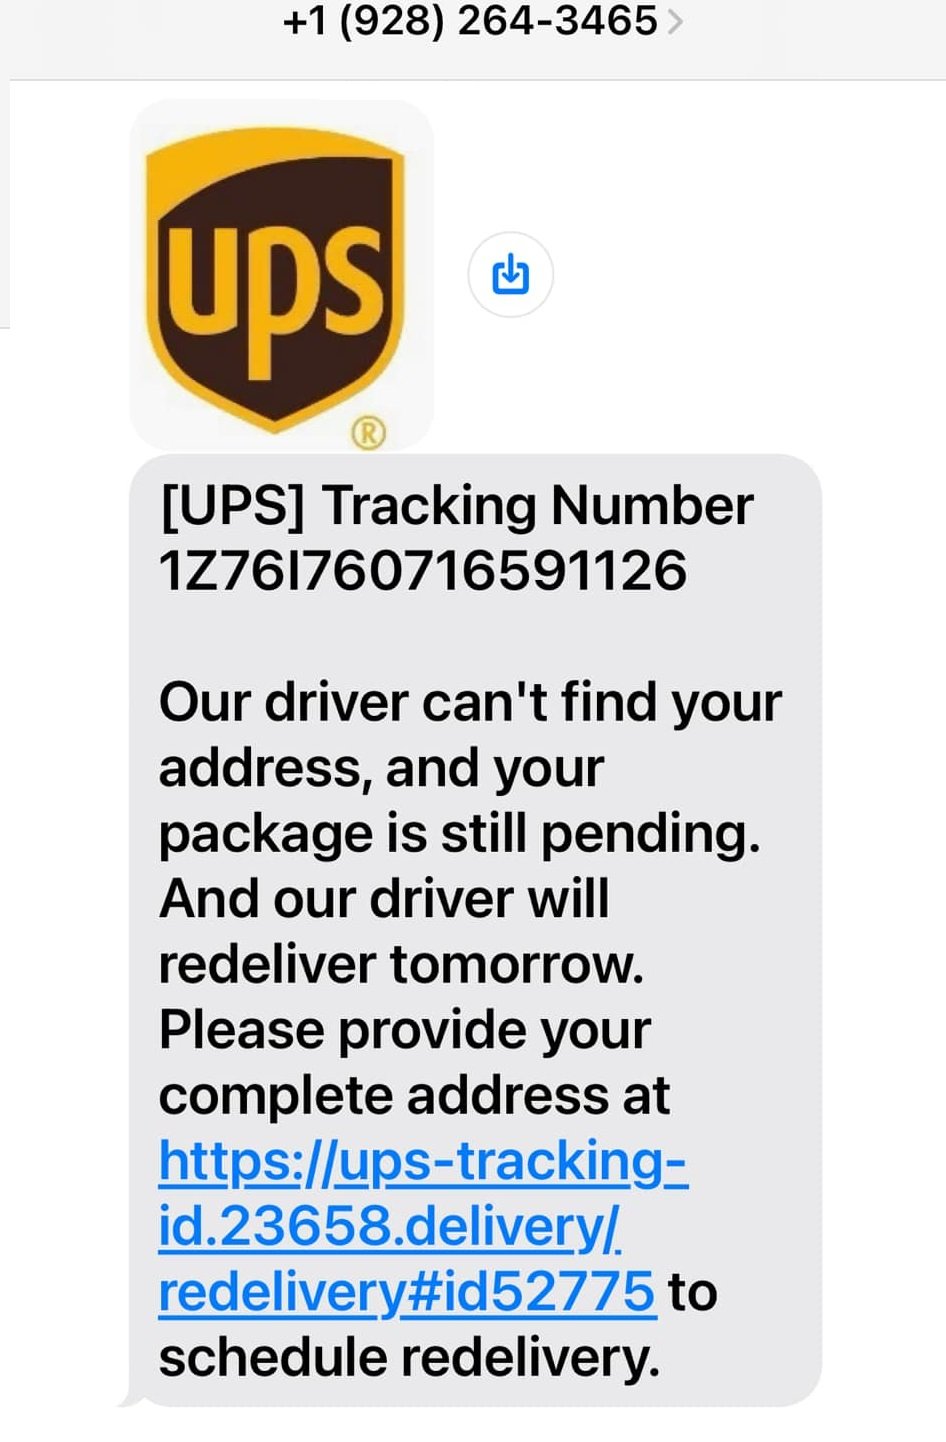 UPS Tracking Number Text Scam